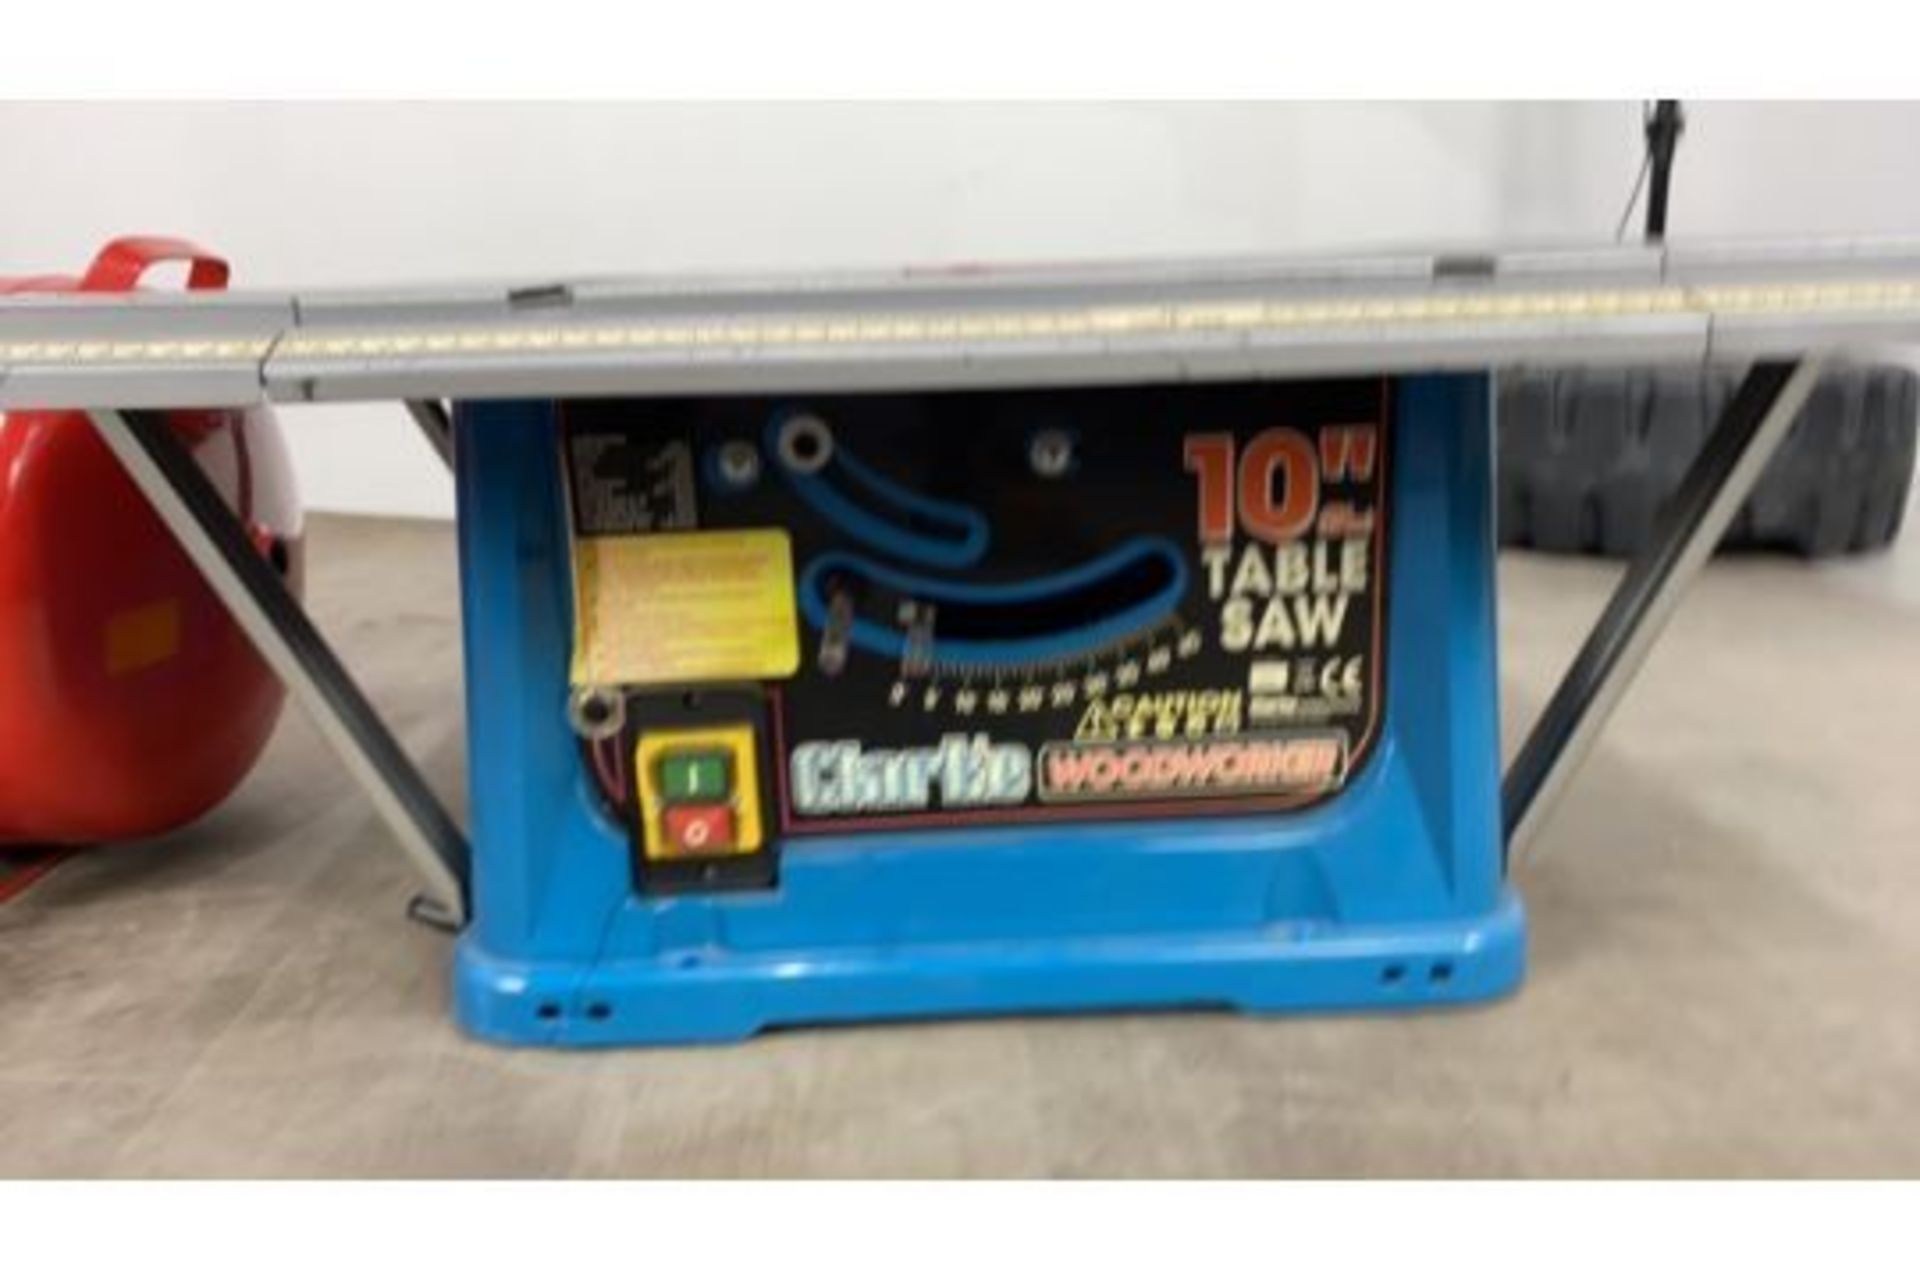 Clarke Panther Air And Clarke Woodworker Table Saw - Image 7 of 8